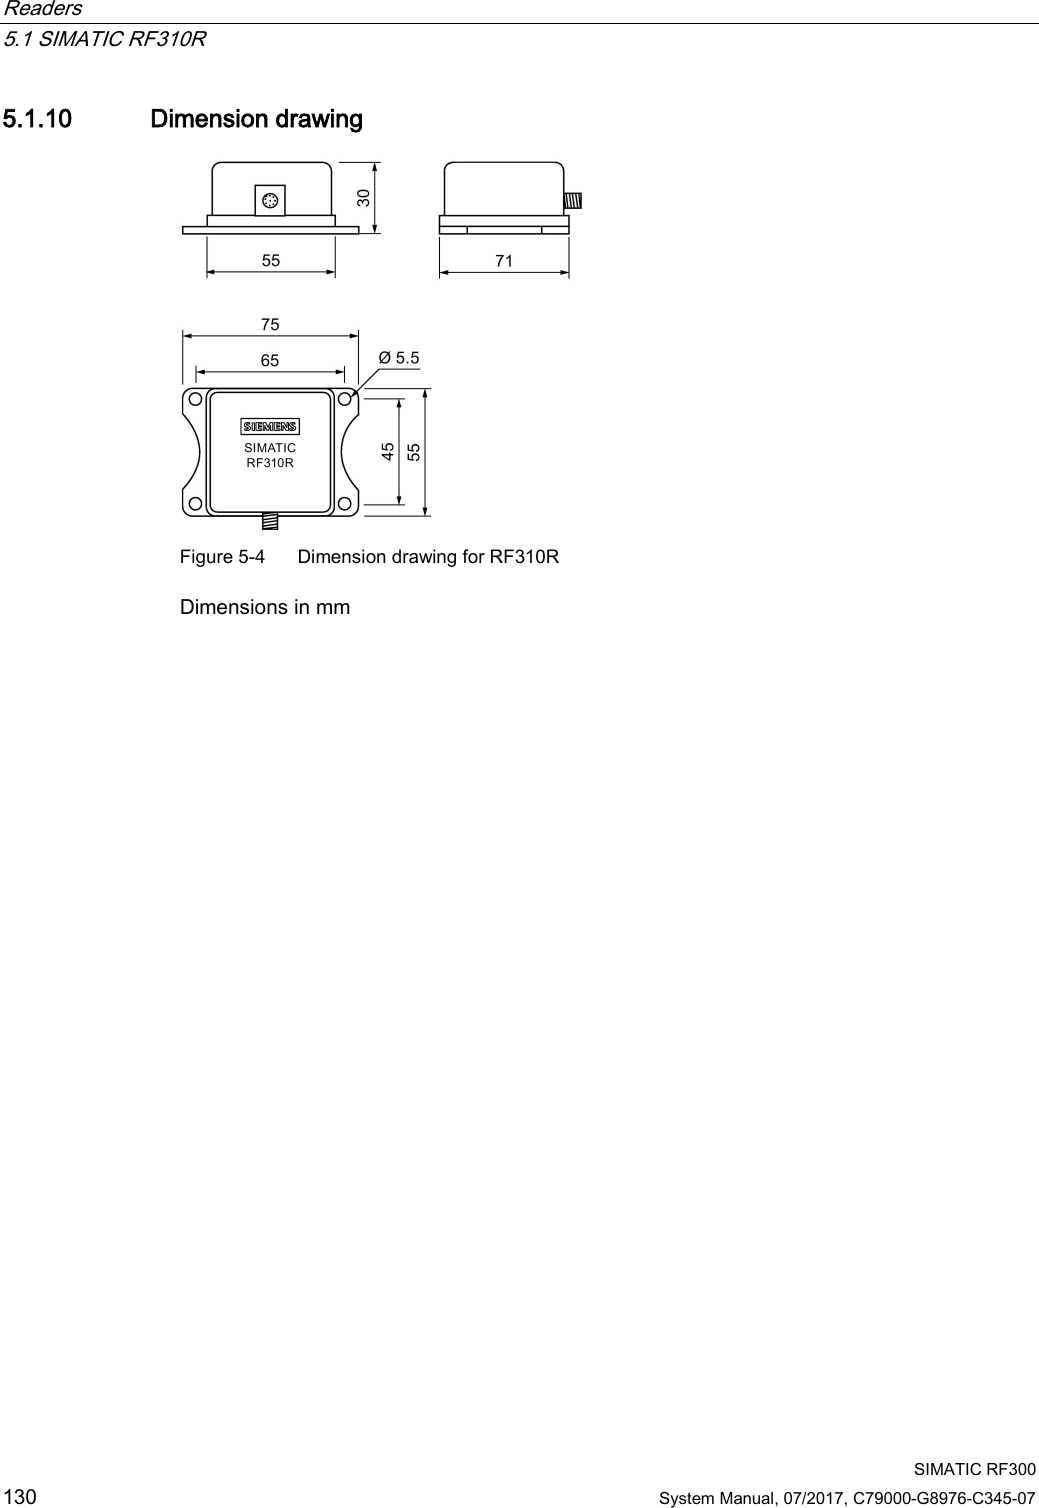 Readers   5.1 SIMATIC RF310R  SIMATIC RF300 130 System Manual, 07/2017, C79000-G8976-C345-07 5.1.10 Dimension drawing  Figure 5-4  Dimension drawing for RF310R Dimensions in mm 